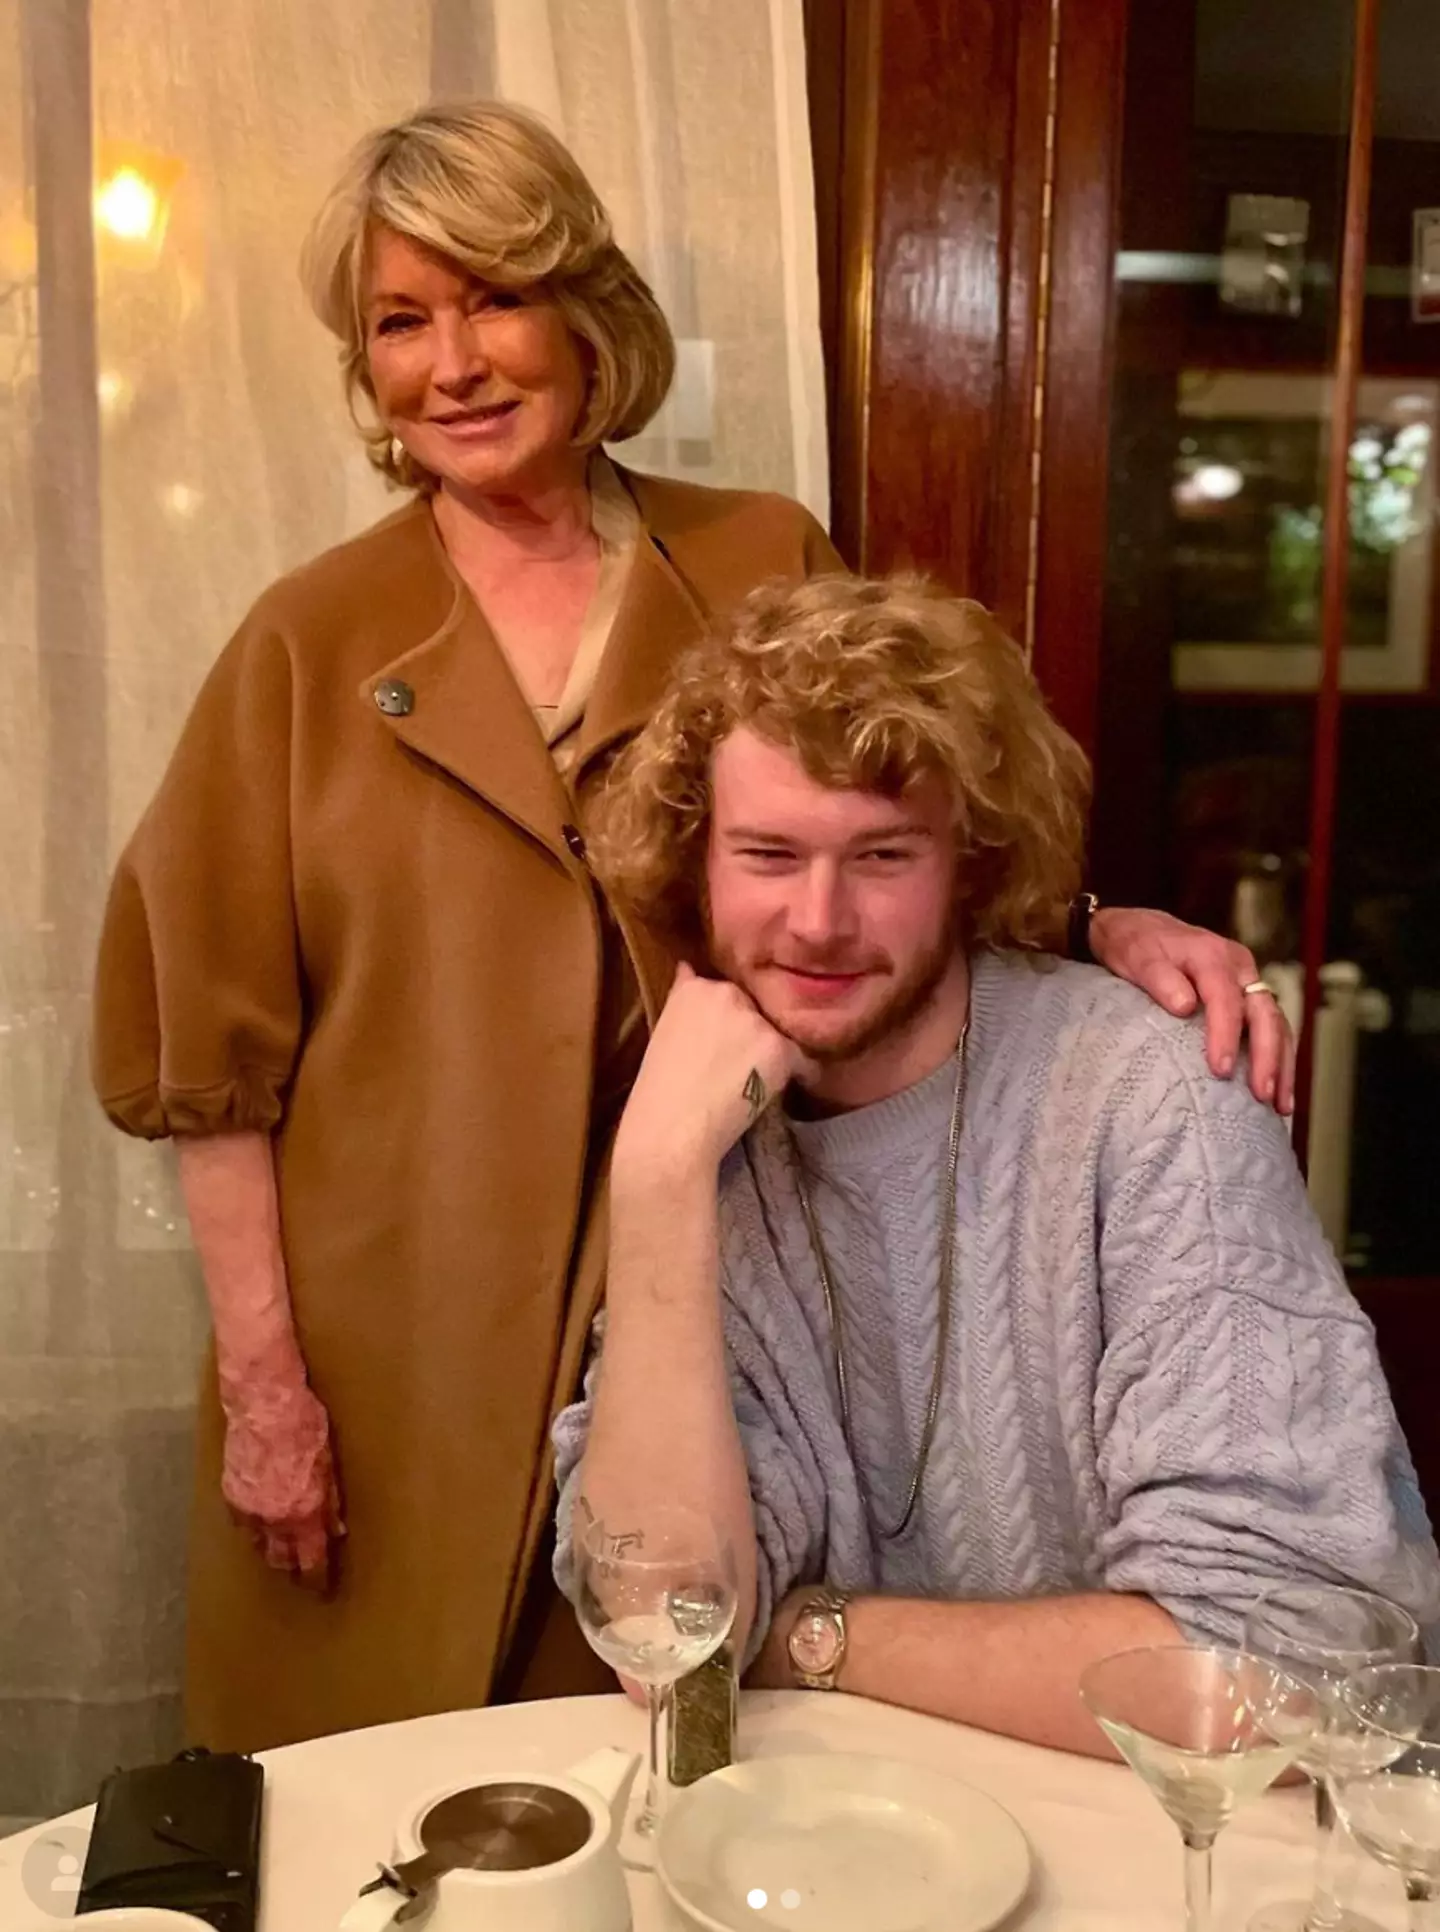 Martha Stewart and Yung Gravy hung out on Valentine's Day this year.